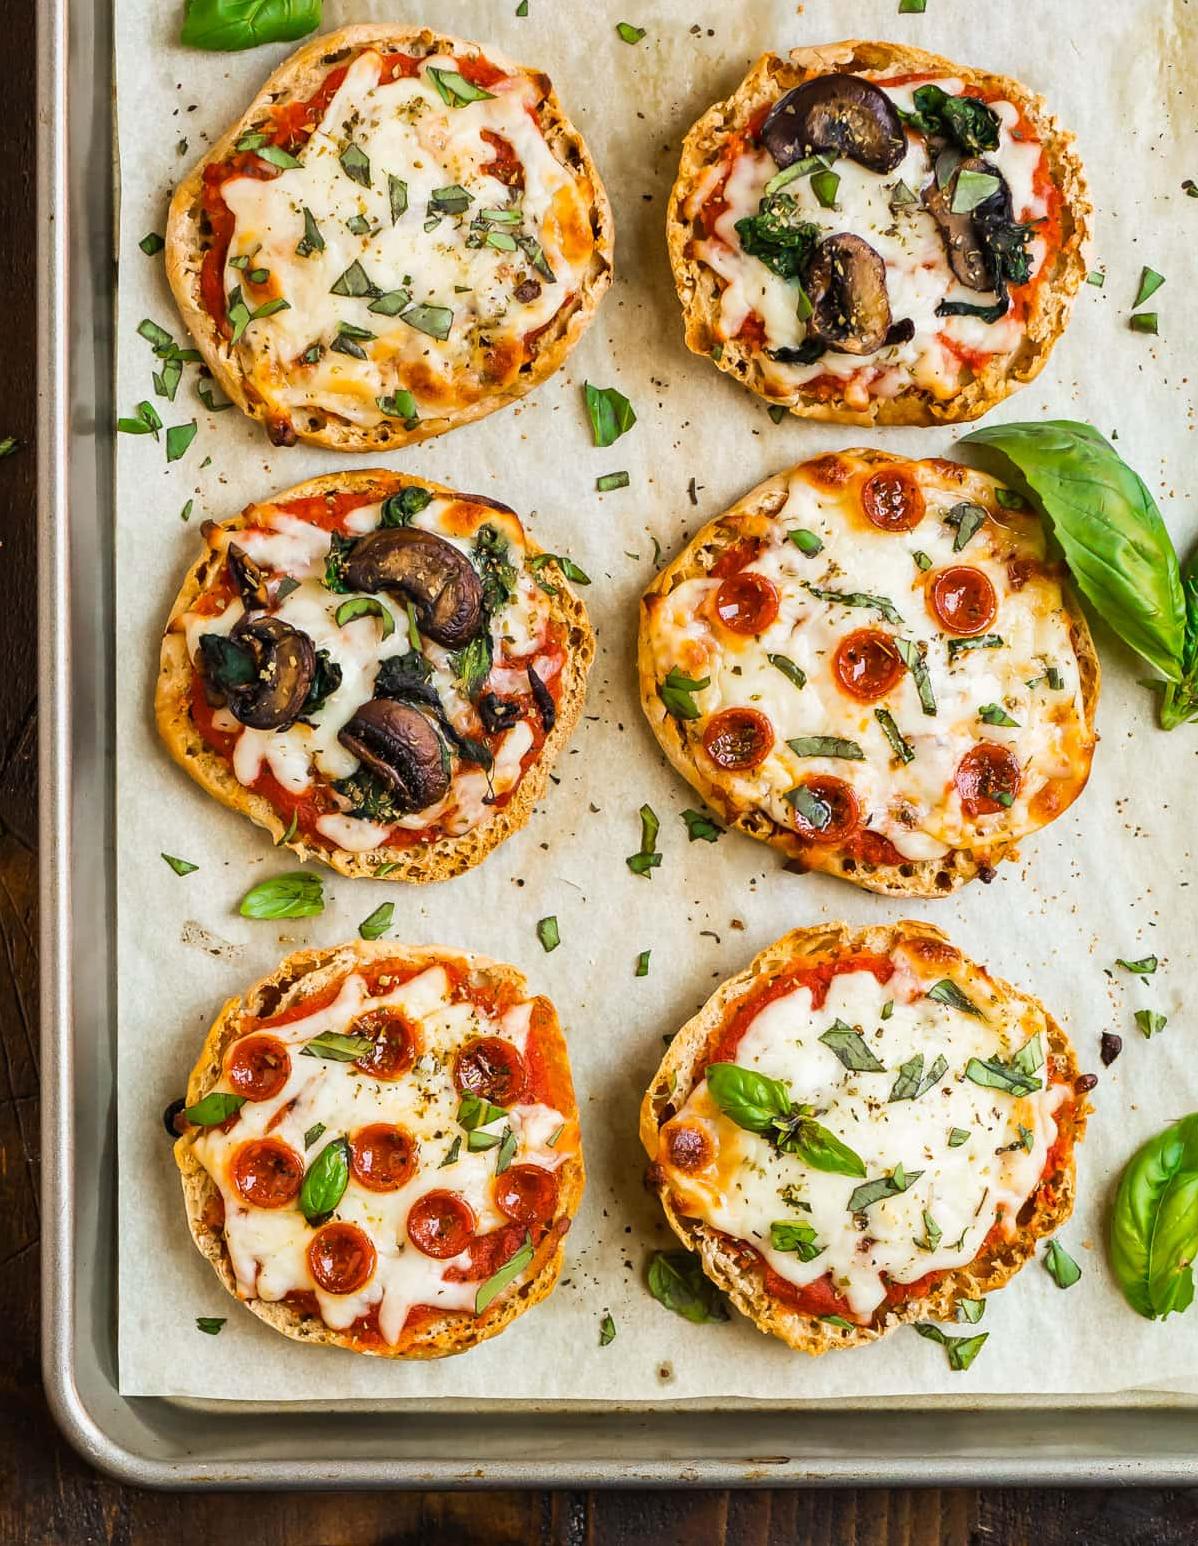  English muffins make the perfect base for these mini pizzas, adding a delightful crunch.